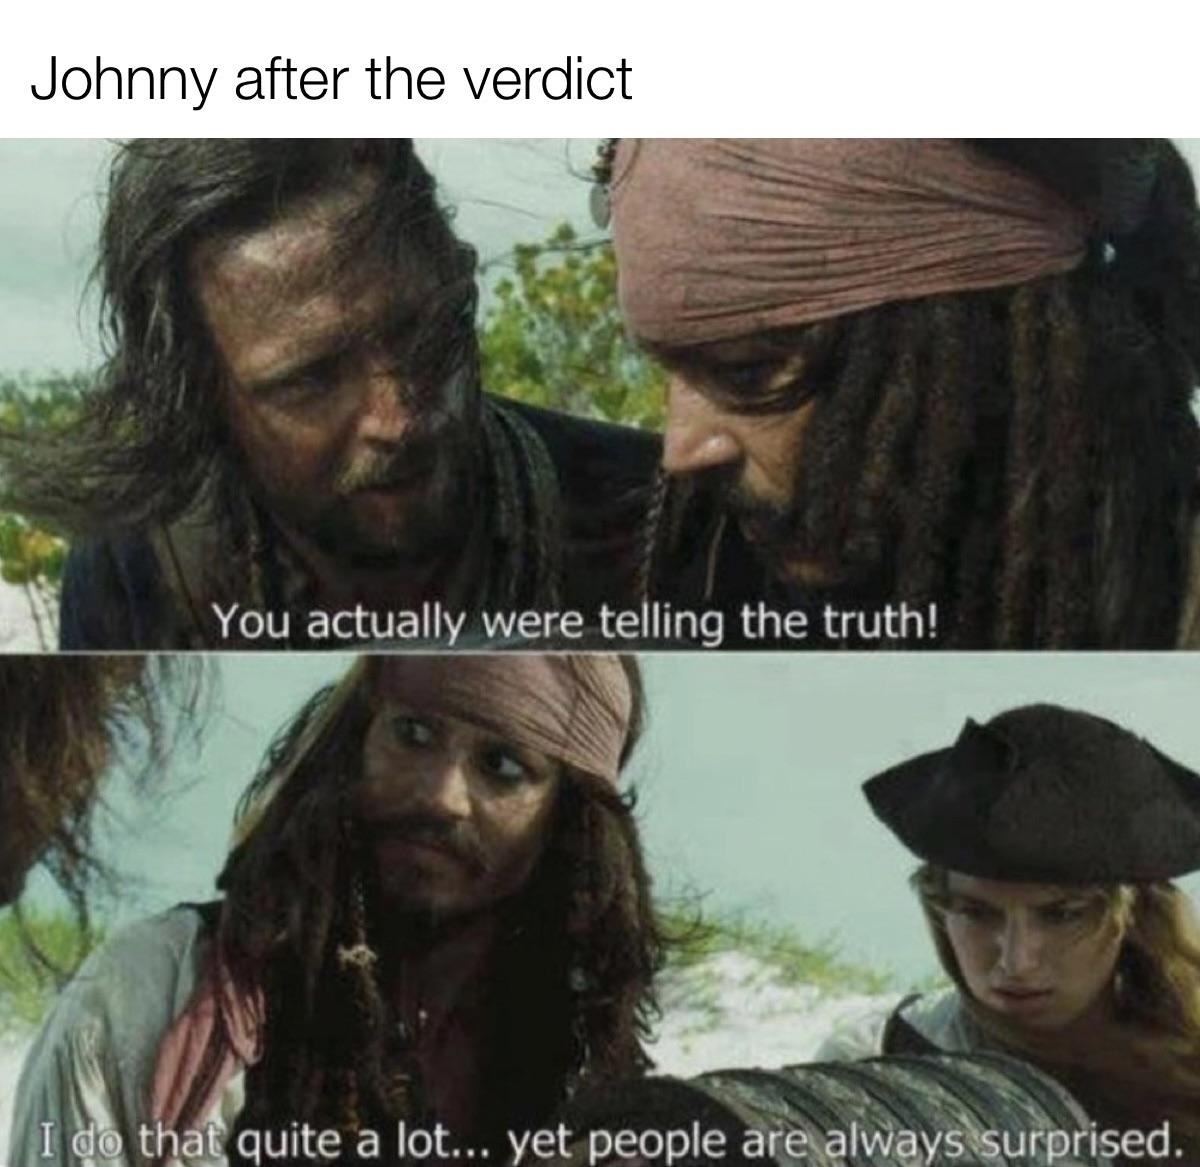 dank memes - you were telling the truth jack sparrow - Johnny after the verdict You actually were telling the truth! I do that quite a lot... yet people are always surprised.